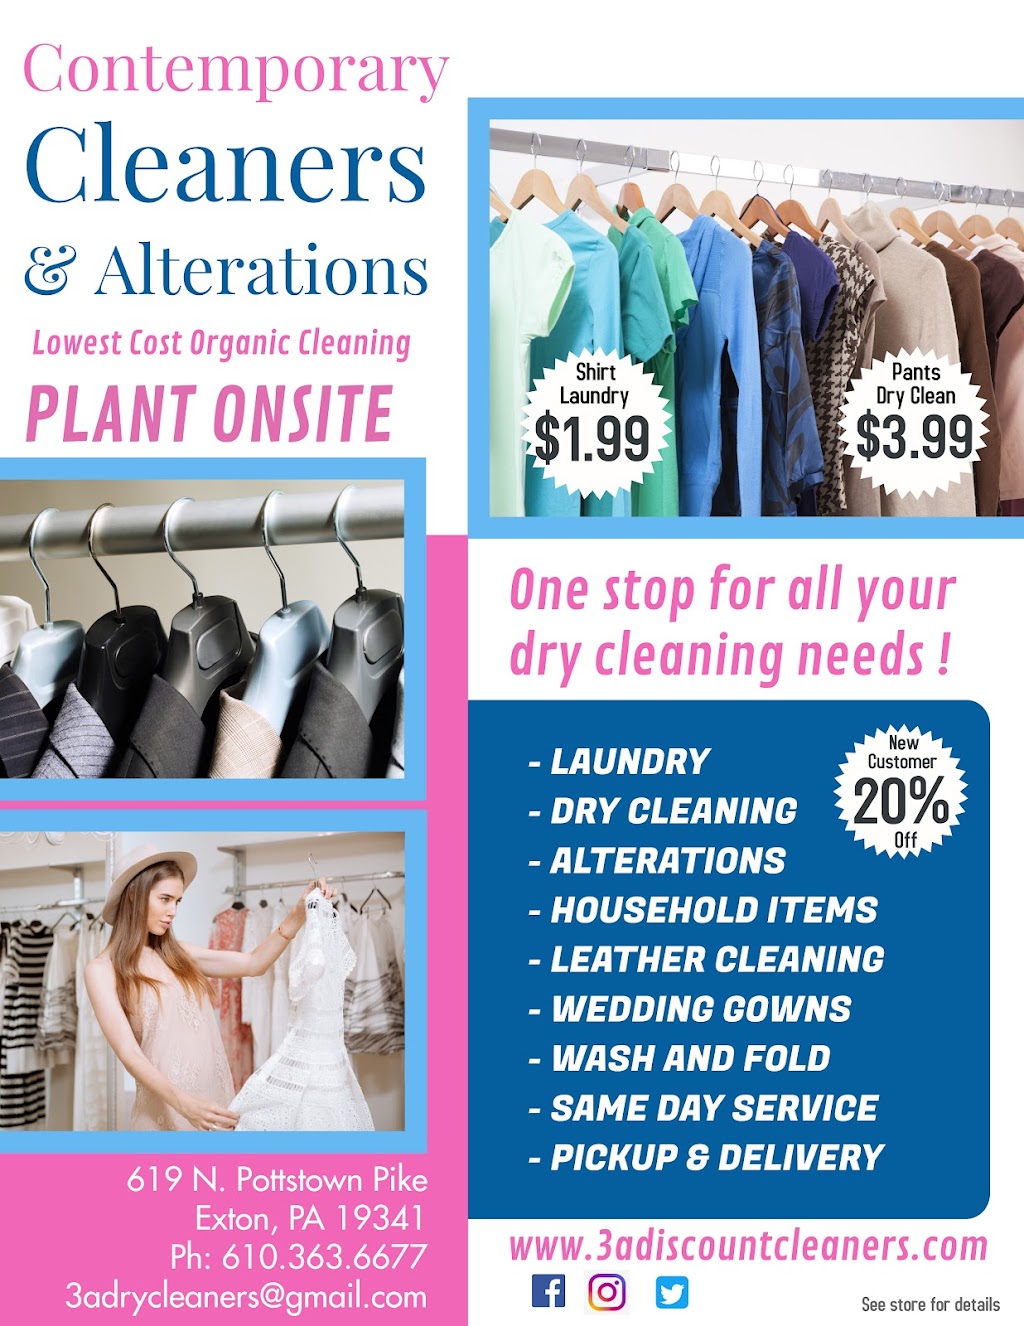 Contemporary Cleaners & Alterations | 619 N Pottstown Pike, Exton, PA 19341 | Phone: (610) 363-6677